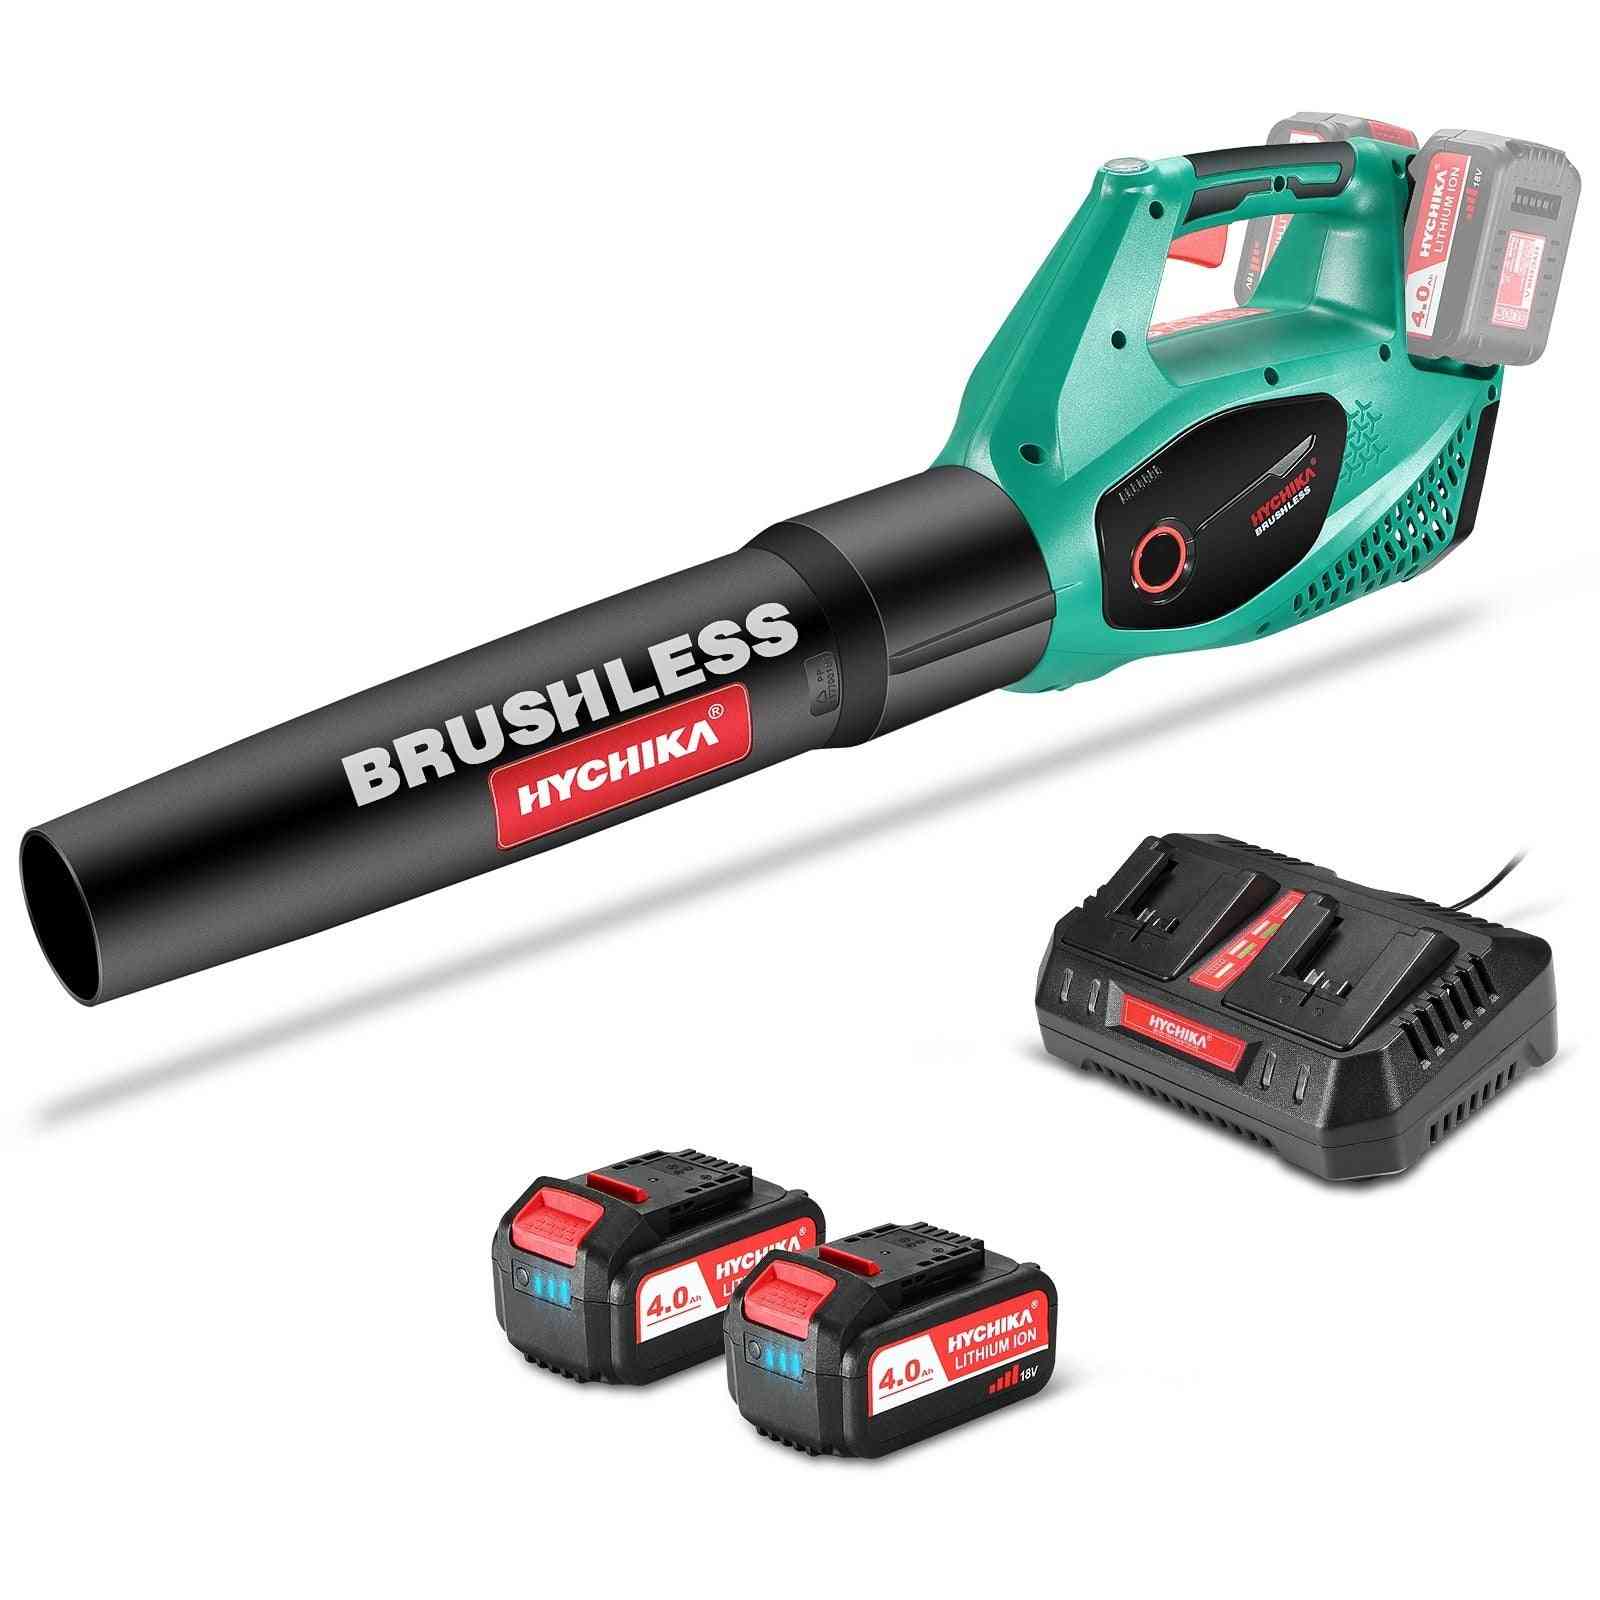 36v Brushless Leaf Blower Cordless Lithium Battery Cleaning Dust Collector